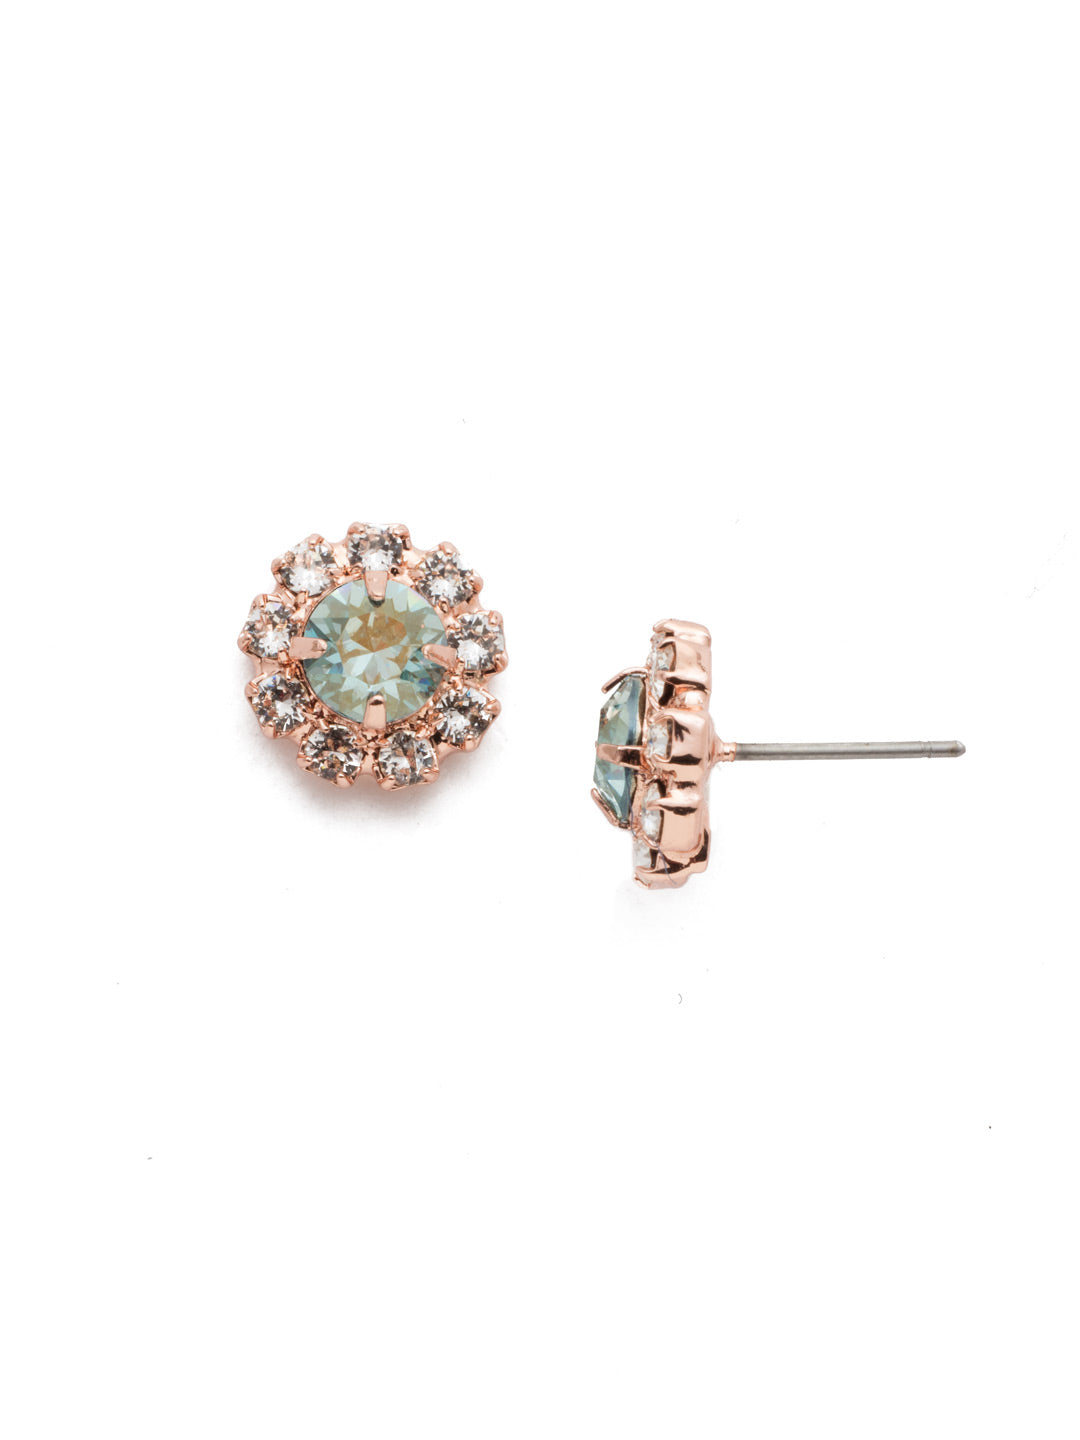 Best Bud Stud Earrings - EDM41RGCAZ - This budding beauty features a nature-inspired design perfect for everyday wear. From Sorrelli's Crystal Azure collection in our Rose Gold-tone finish.